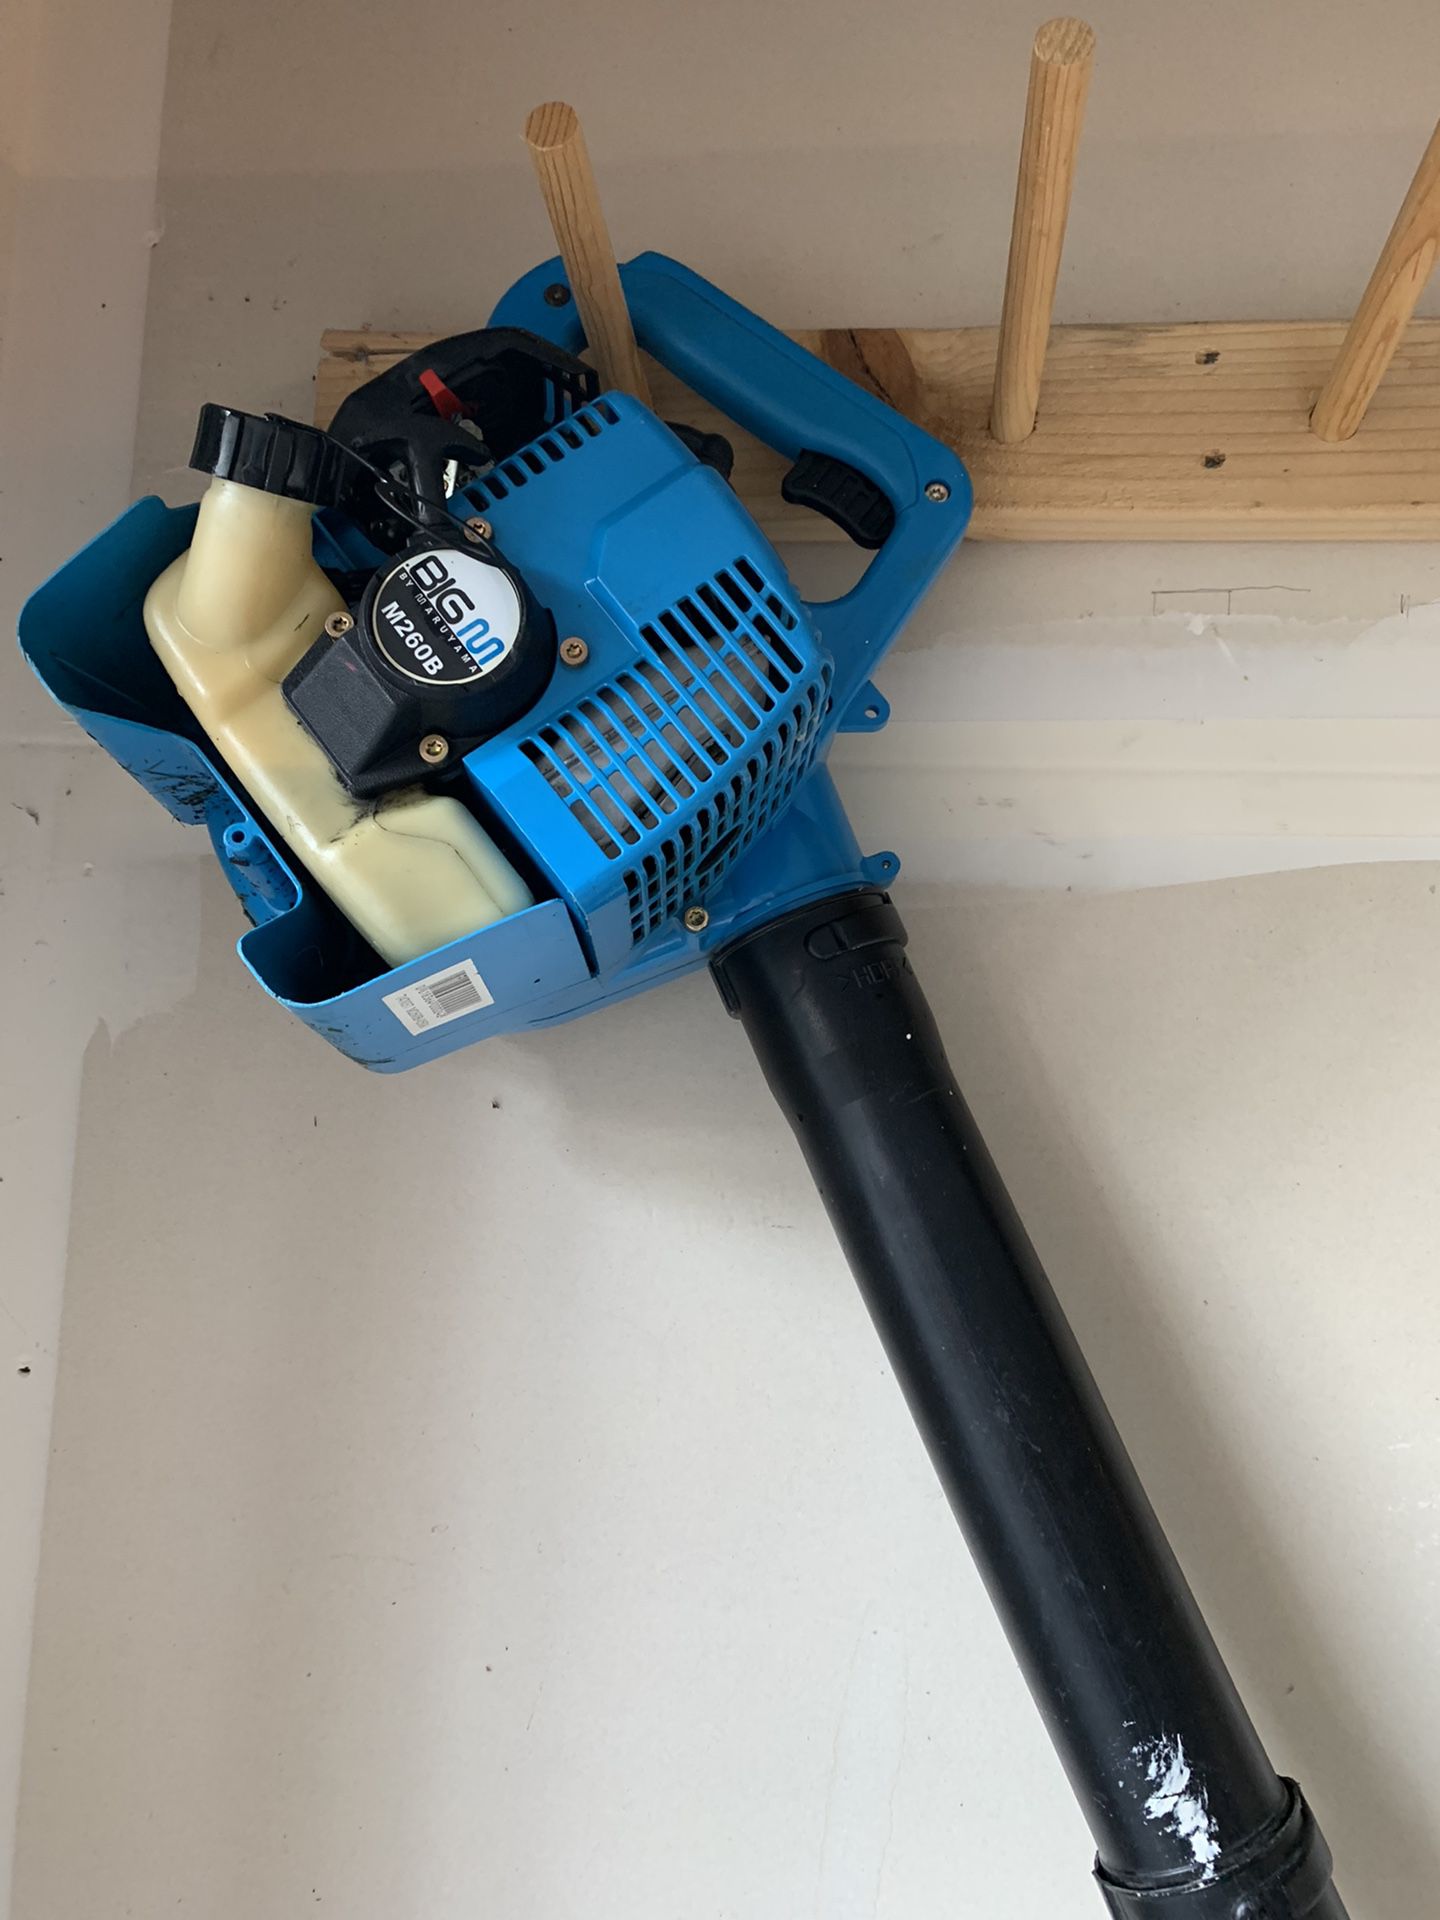 Leaf blower - Powerful And Excellent Condition 